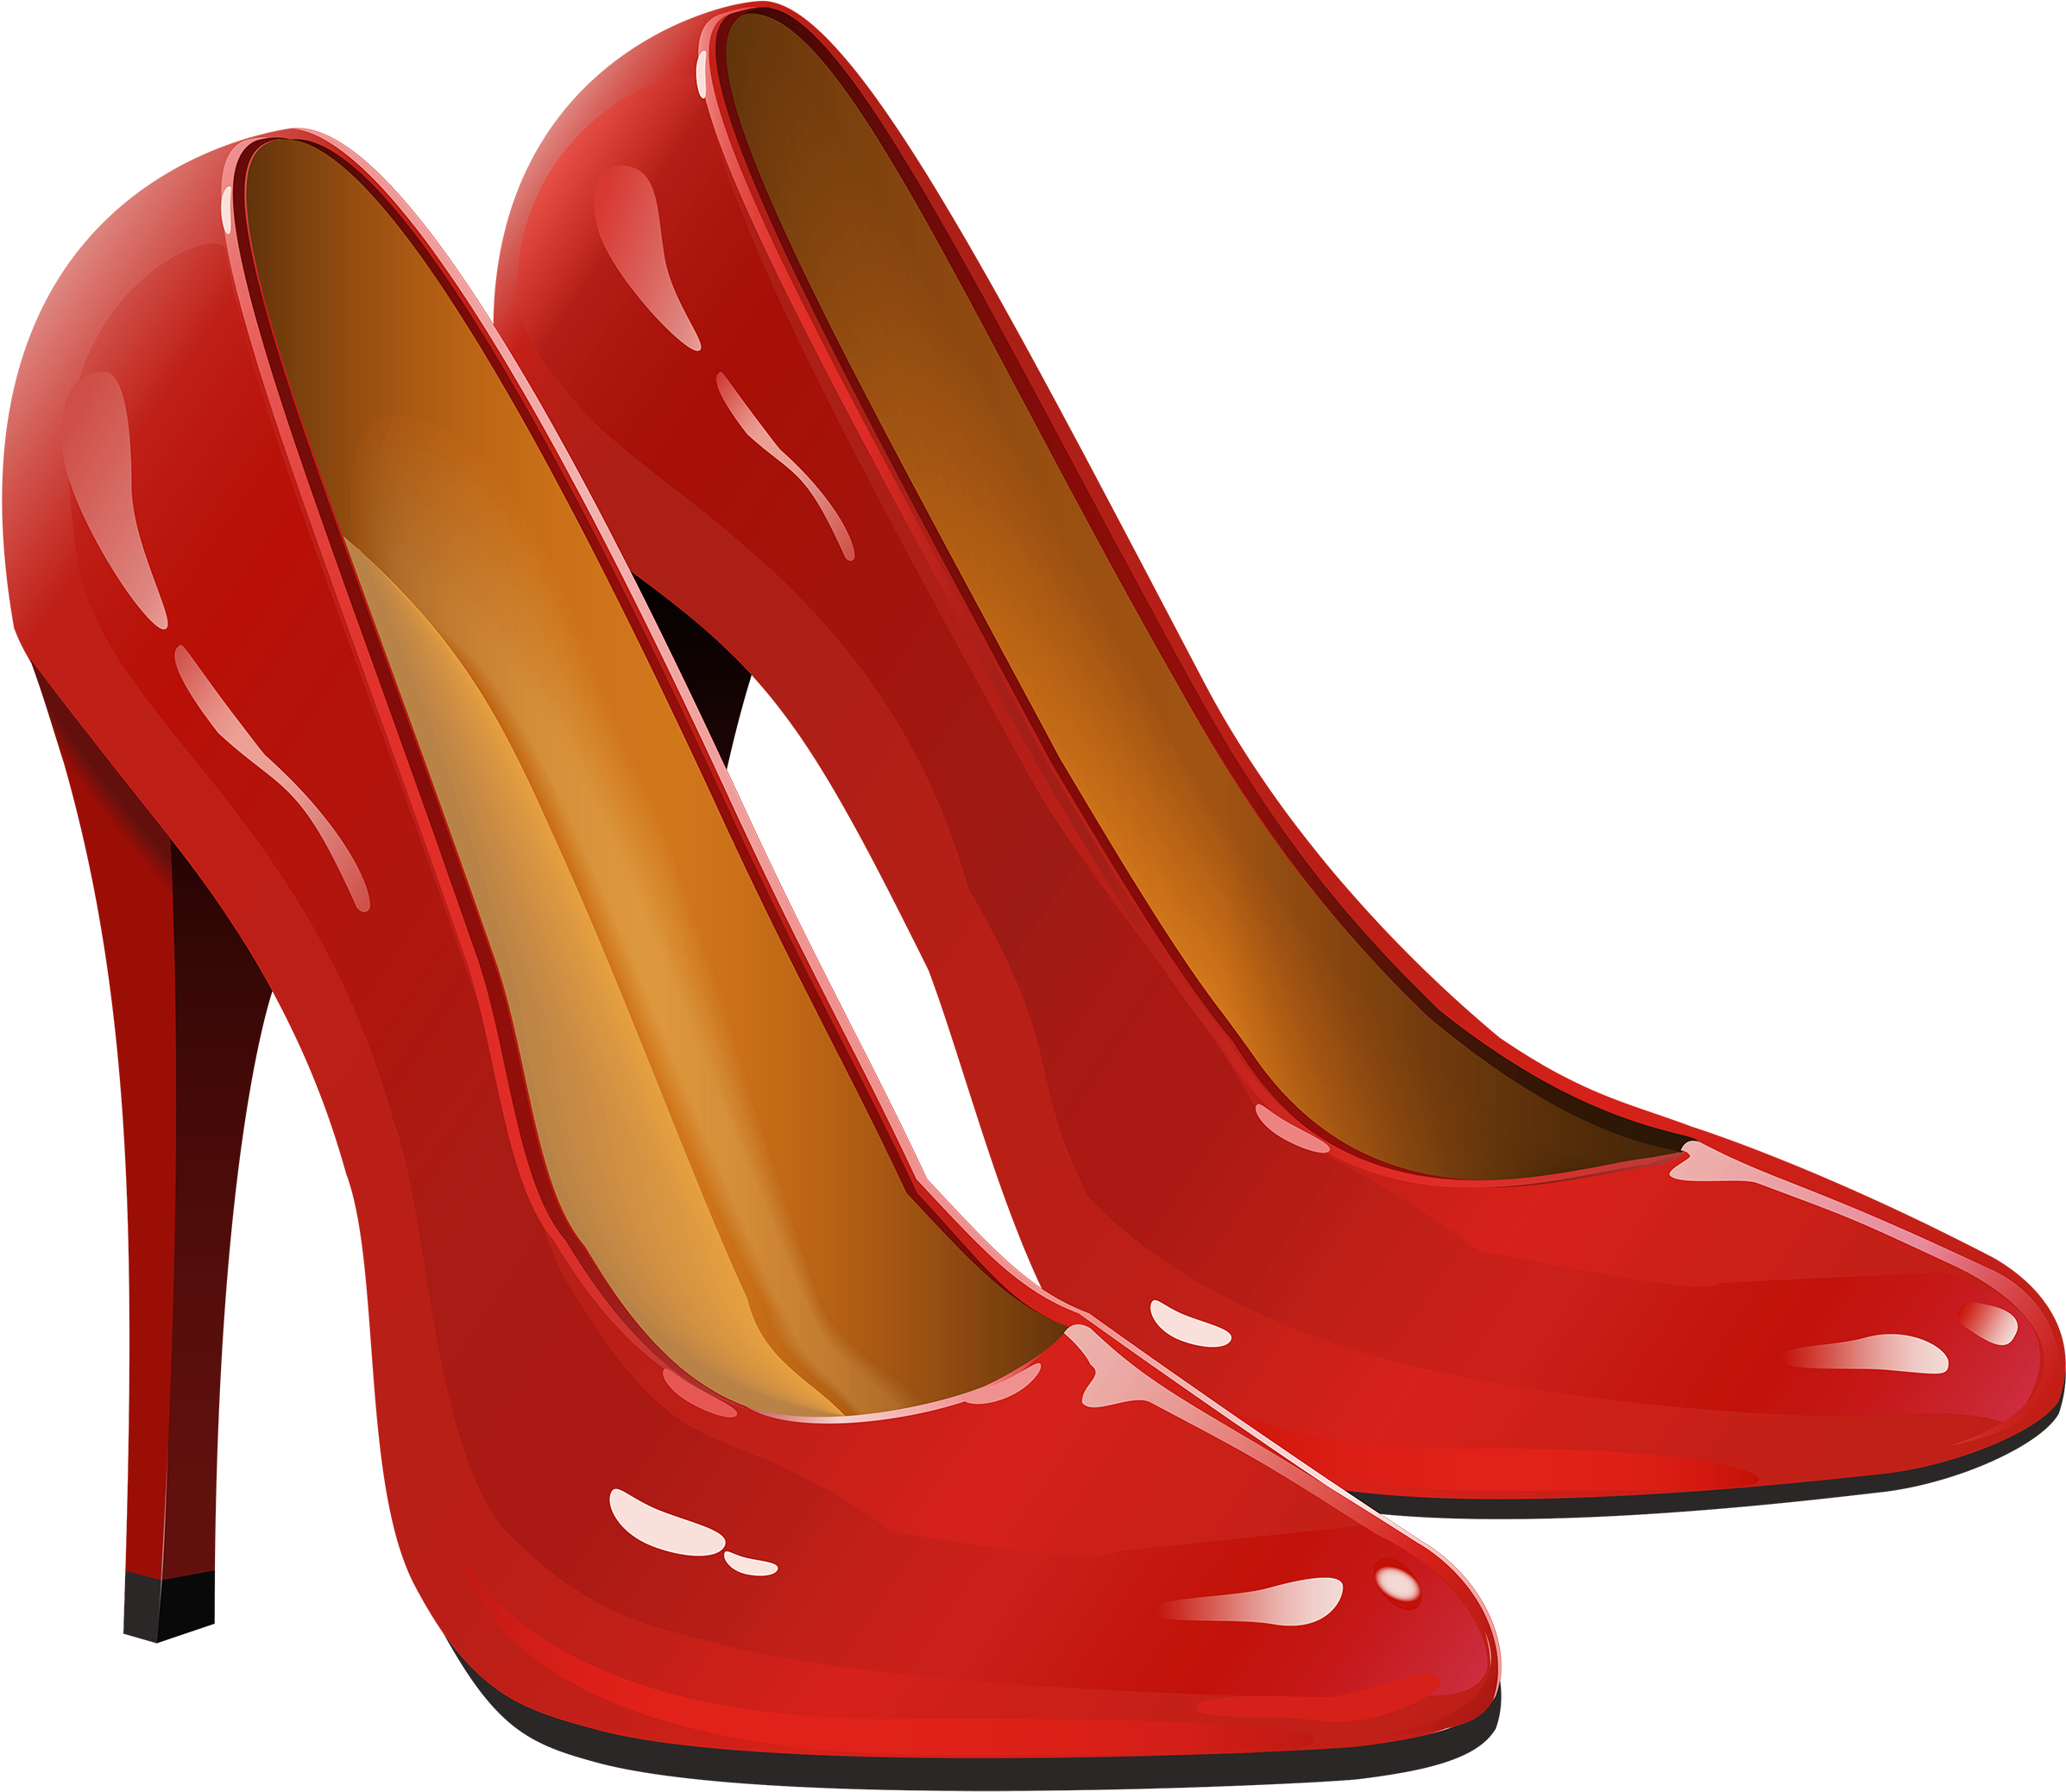 Red Women Shoes Png Transparent Image Clipart Shoes Clip Art Library ...